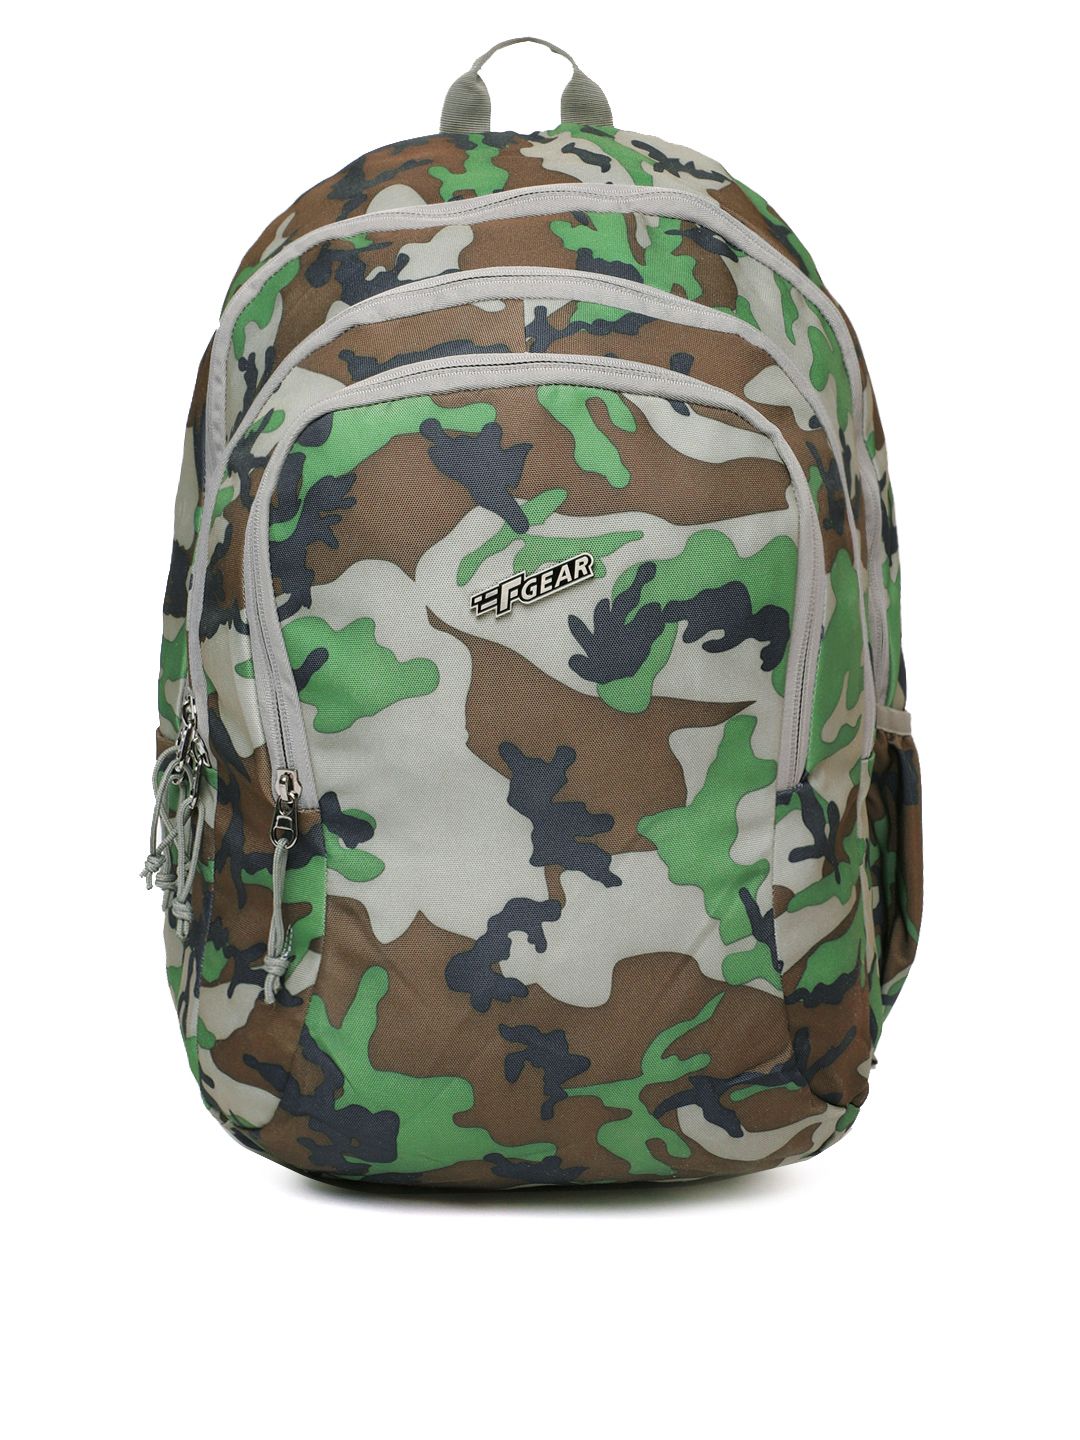 F Gear Unisex Green & Grey Printed Backpack Price in India